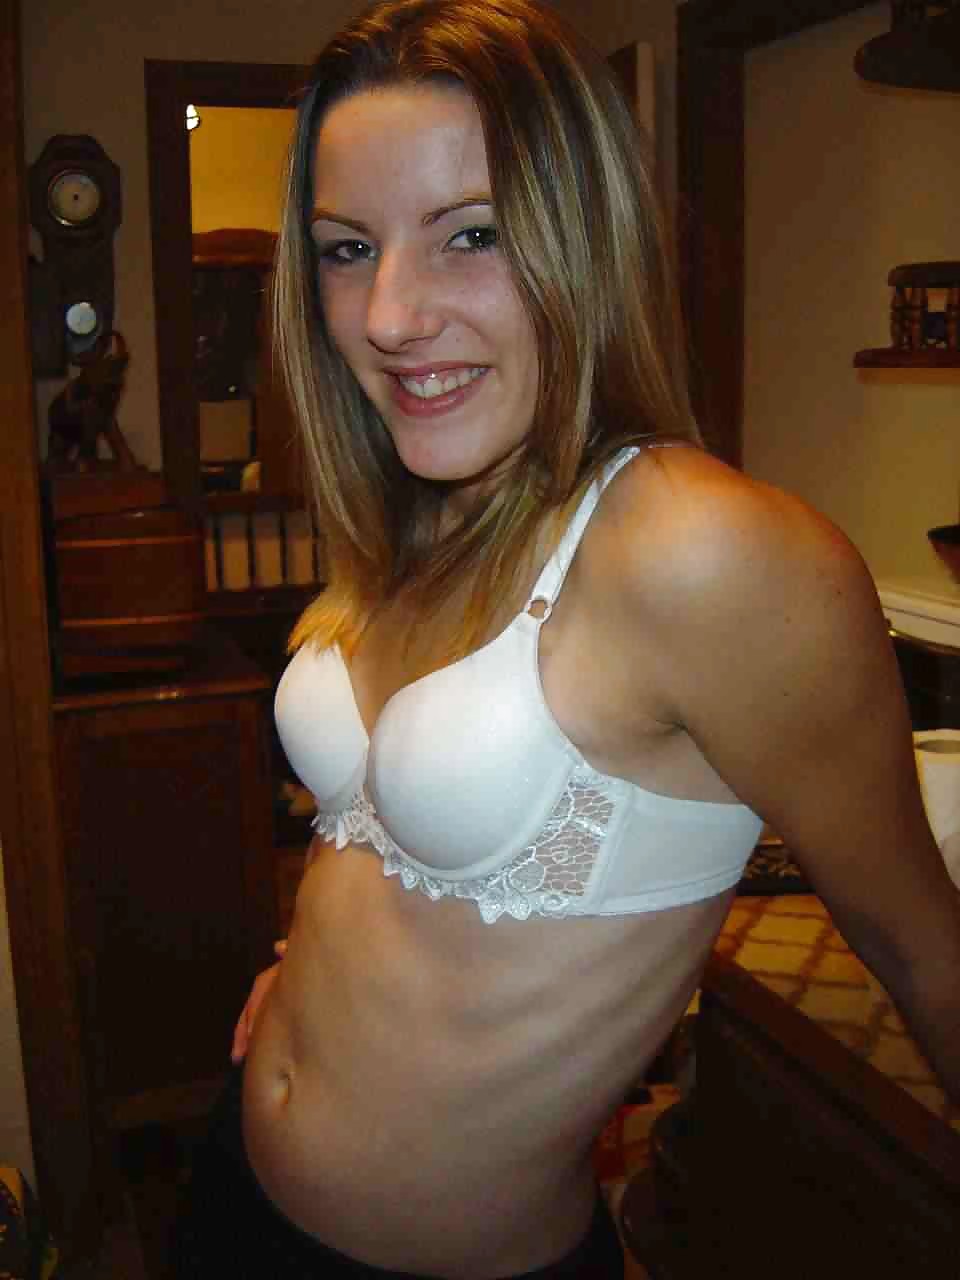 Another Amateur Girl Loving The Cock Exposed! adult photos